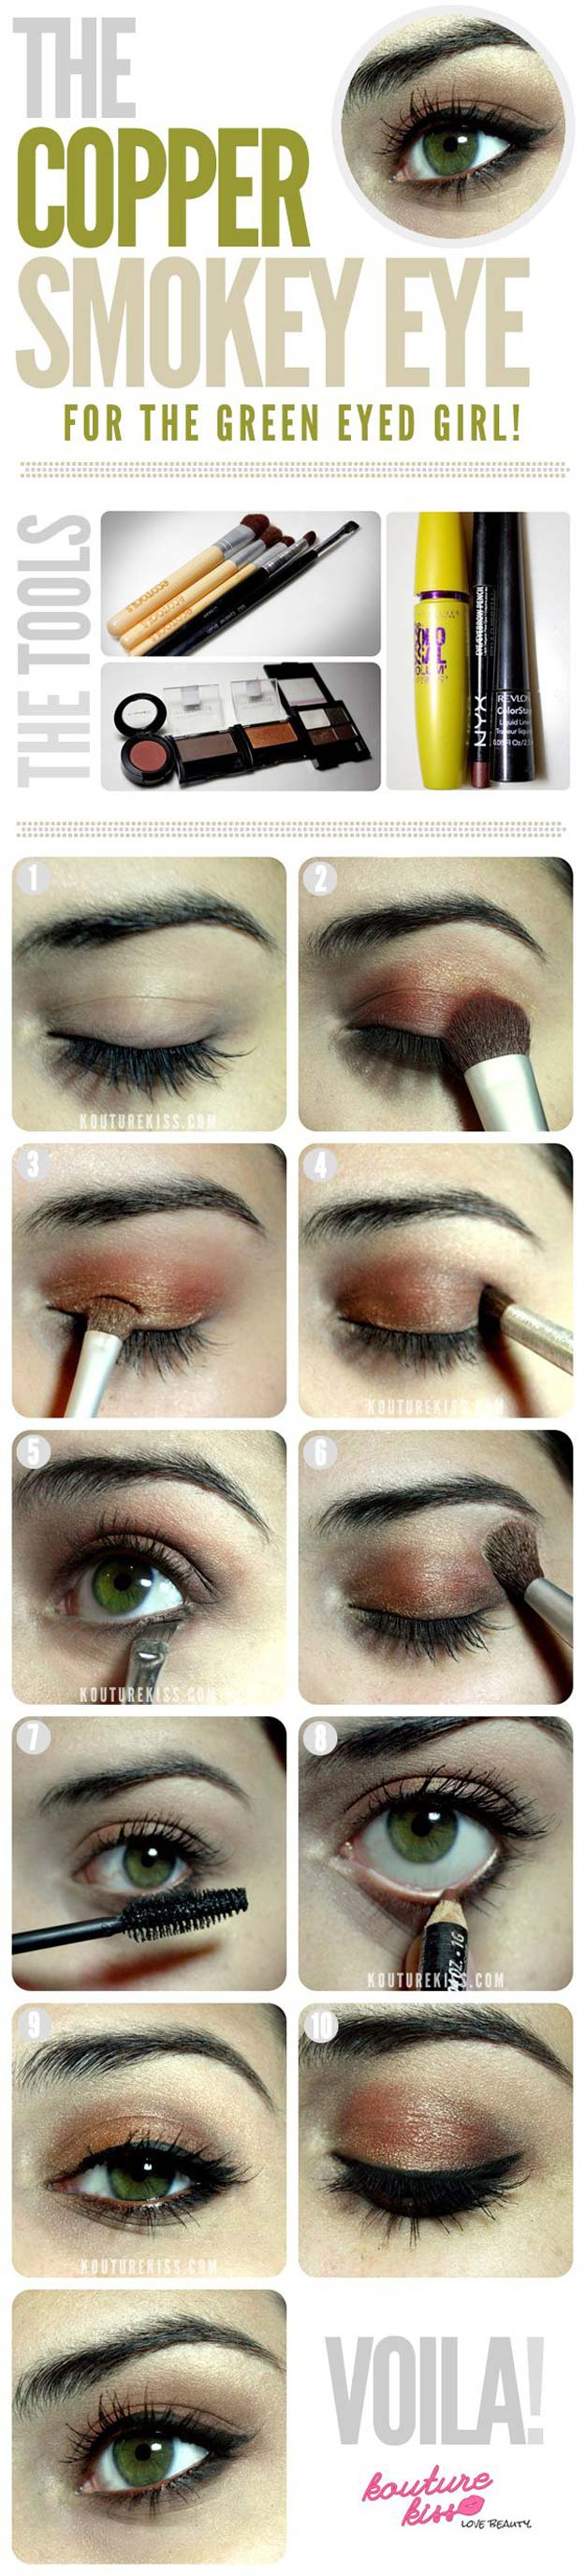 Prom Makeup For Hazel Eyes 38 Makeup Ideas For Prom The Goddess